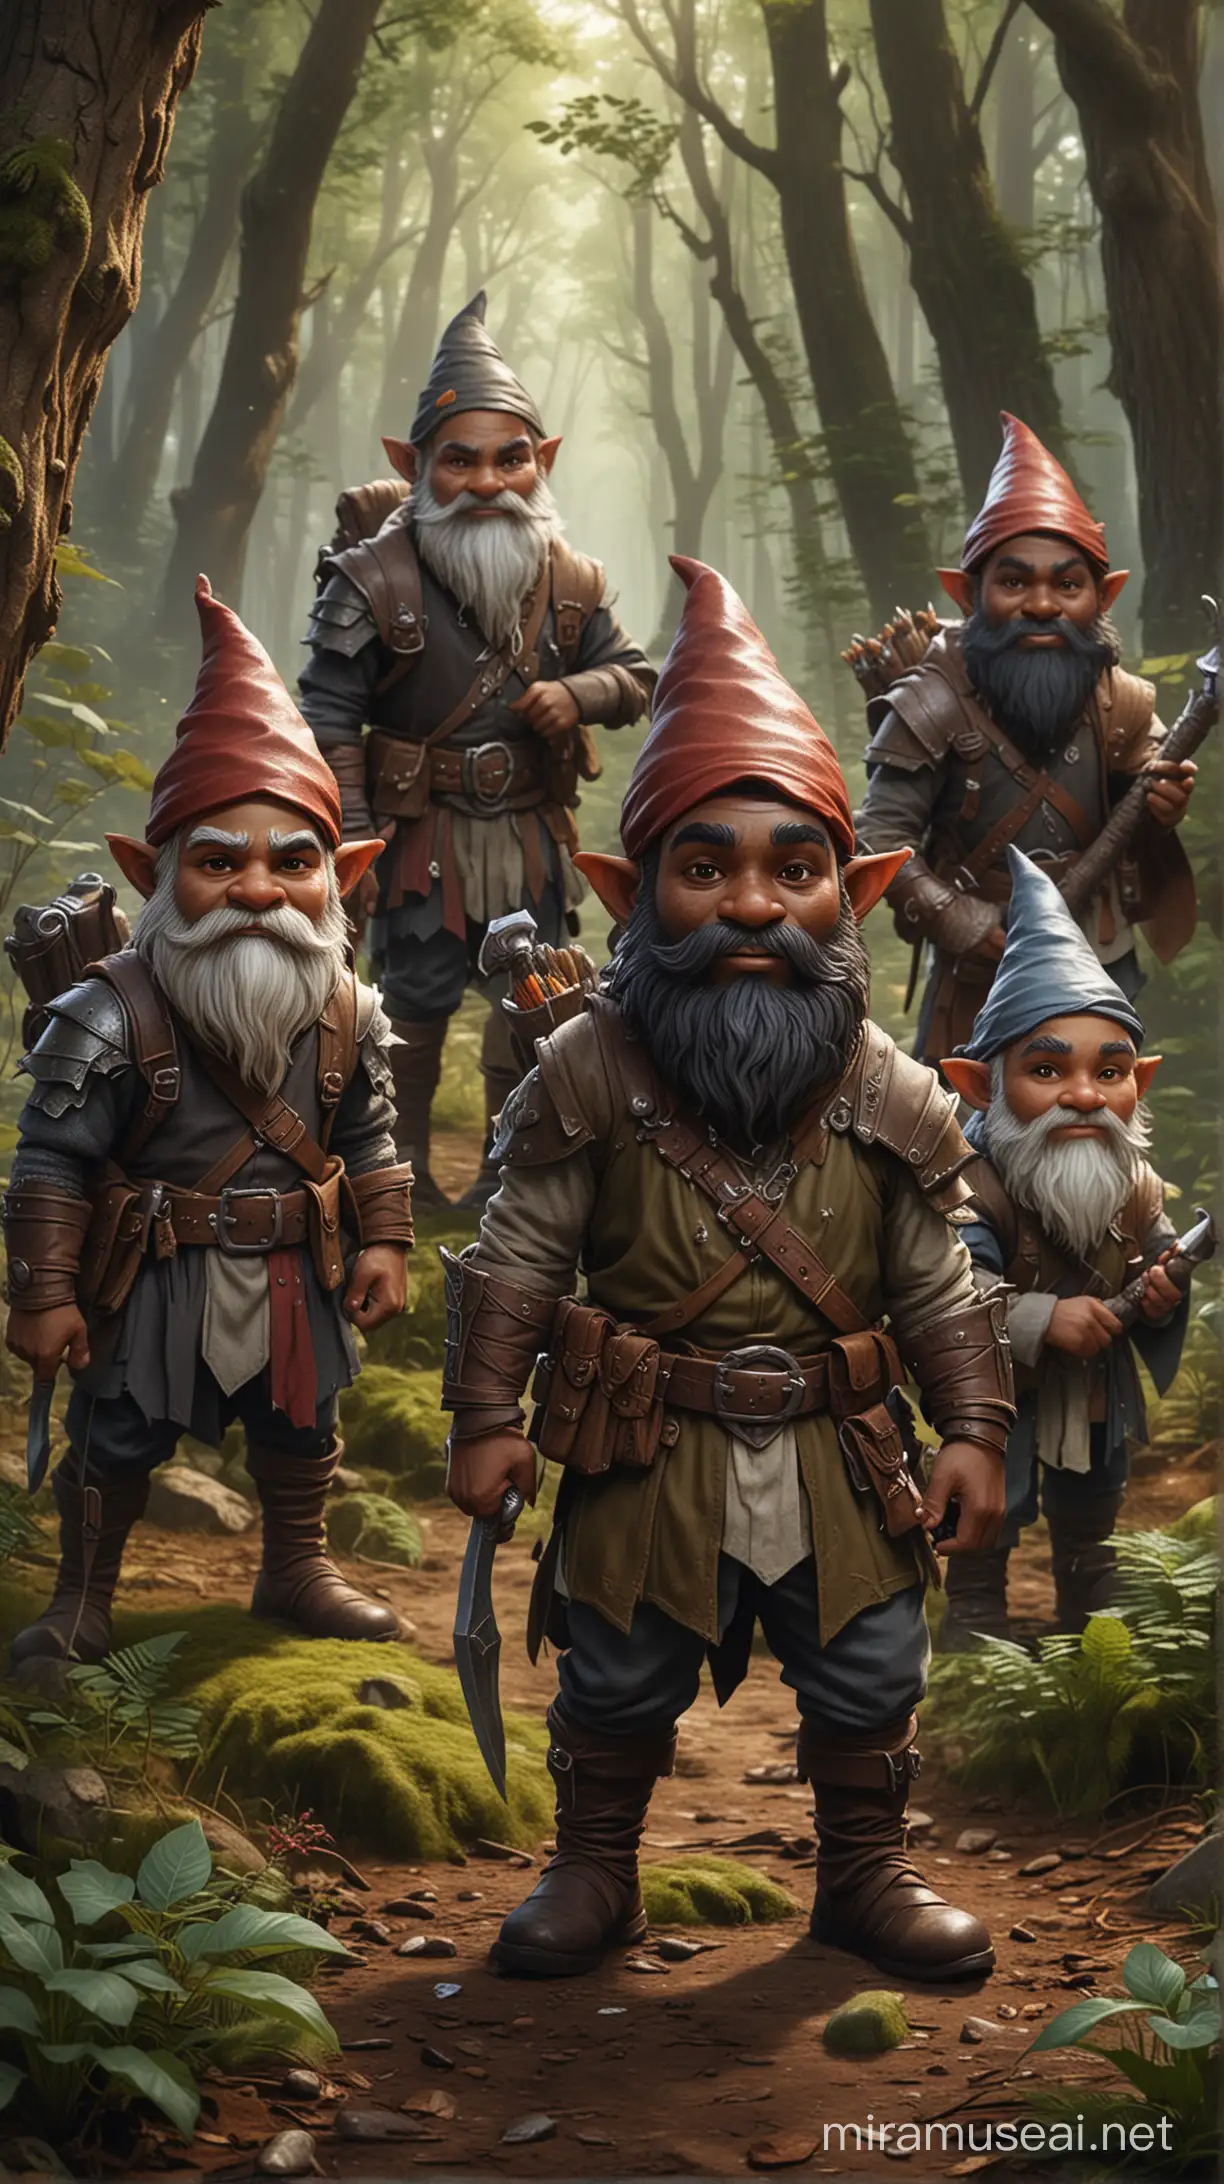 in the style of dungeons and dragons, create 5 dark skinned gnome hunters. All of whom are friendly. They are standing in a forest.